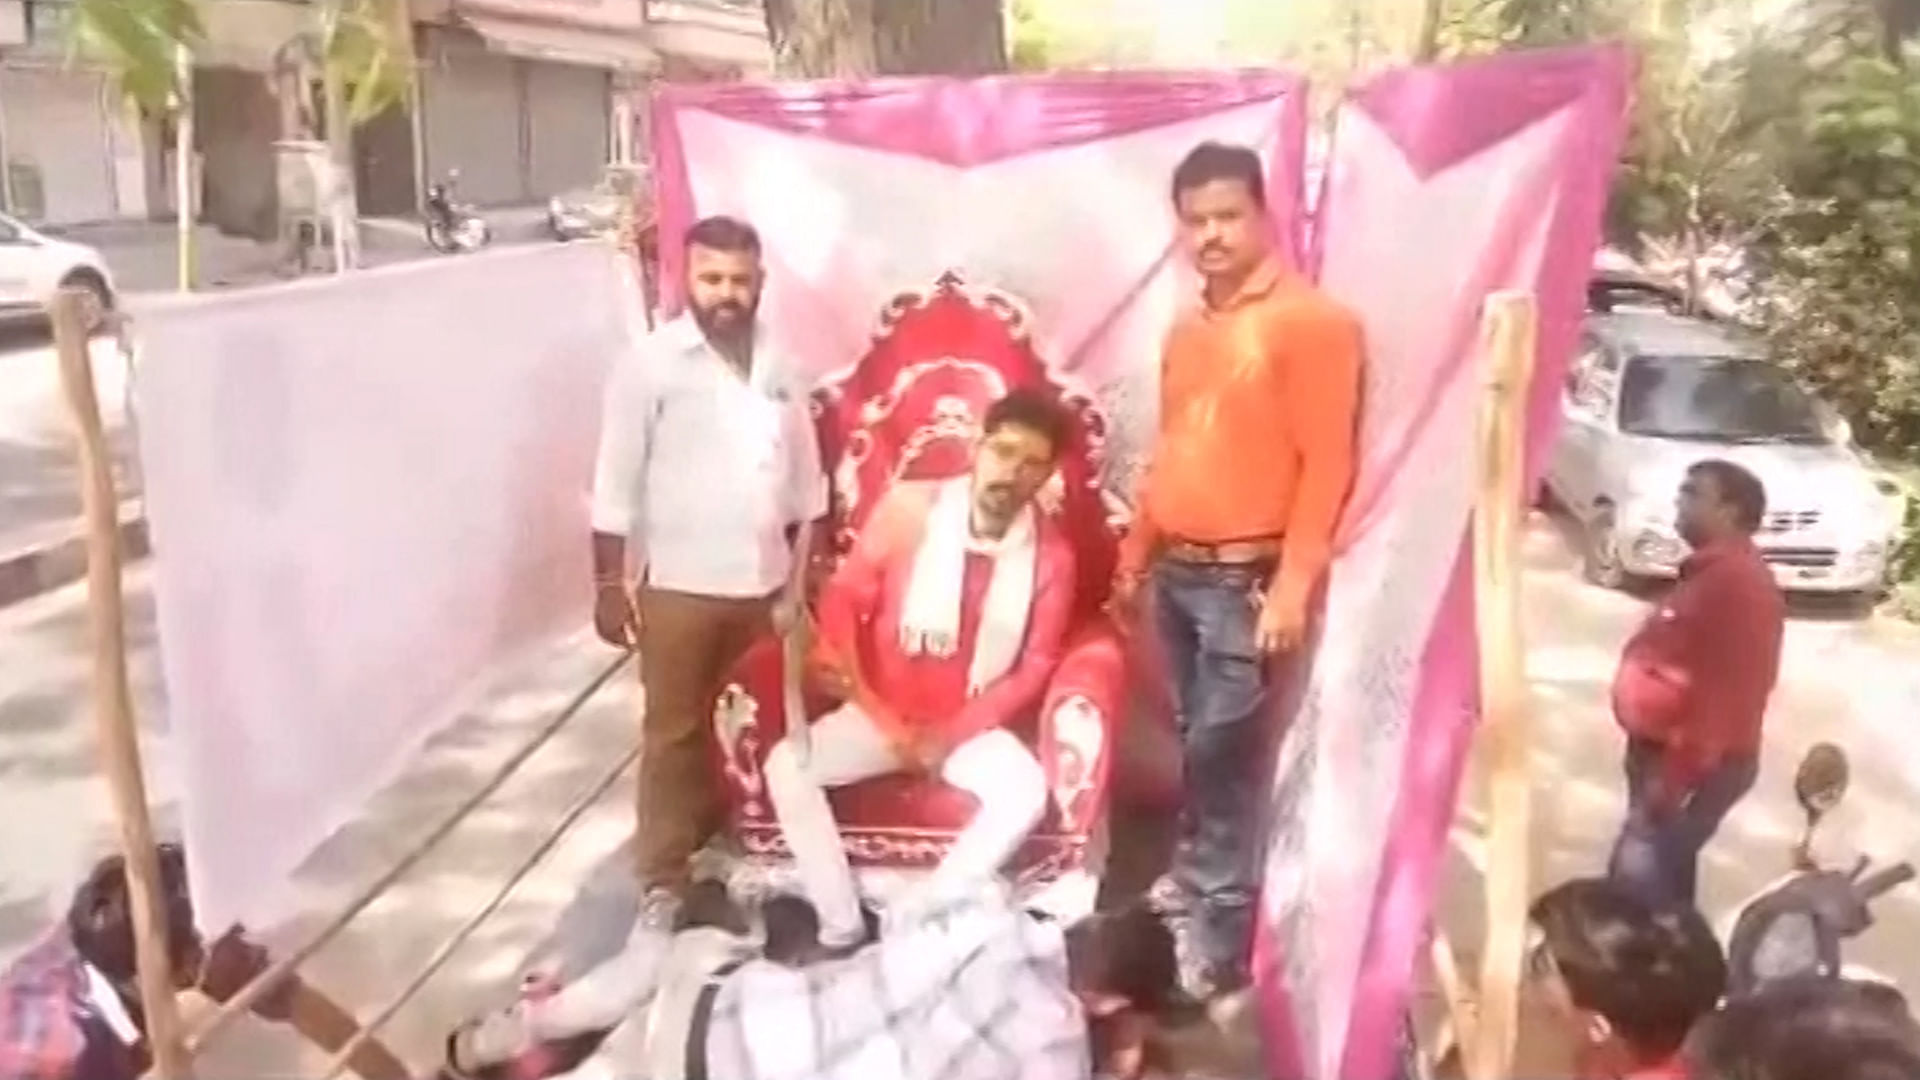 A lookalike of alleged killer Shambhu Lal Raigar was dressed up as him and taken out on a procession glorifying him.